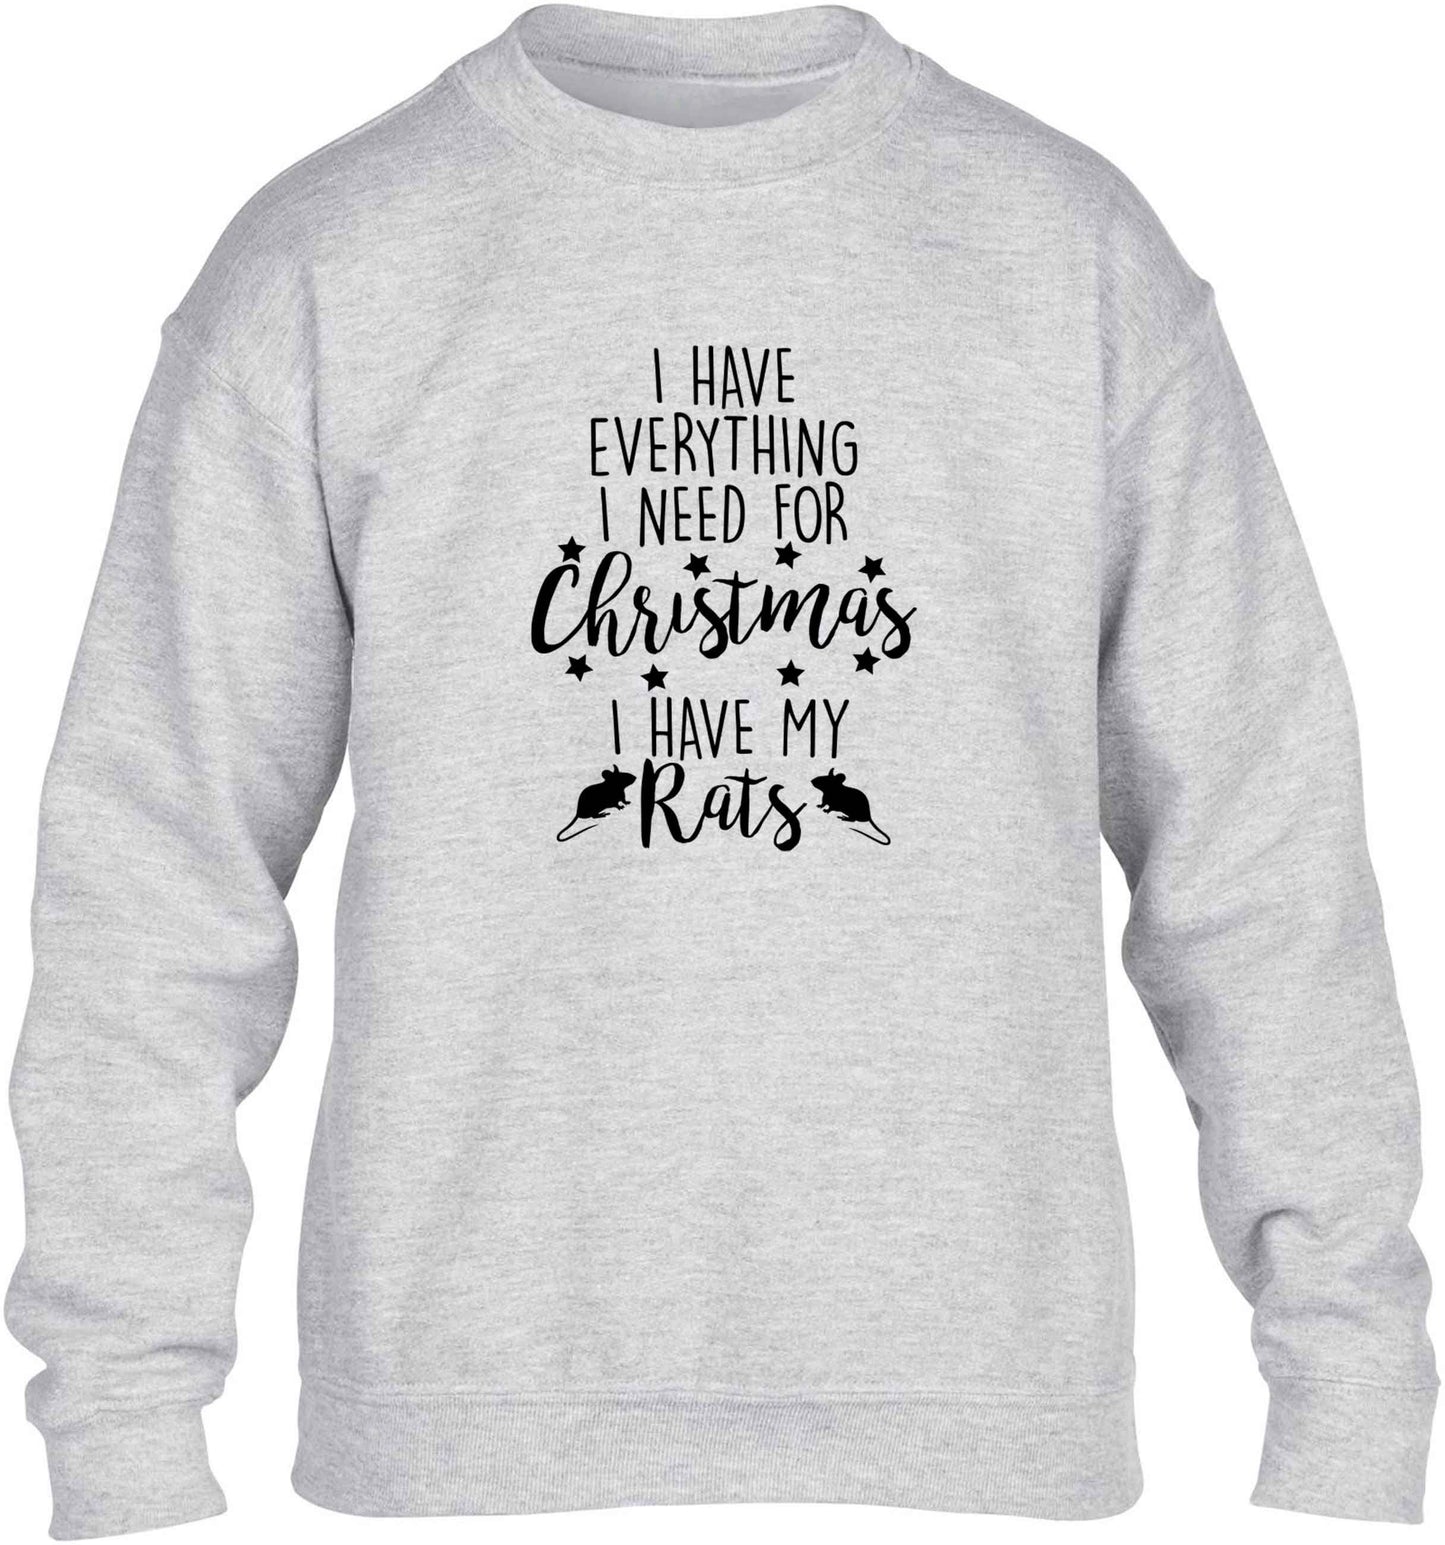 I have everything I need for Christmas I have my rats children's grey sweater 12-13 Years